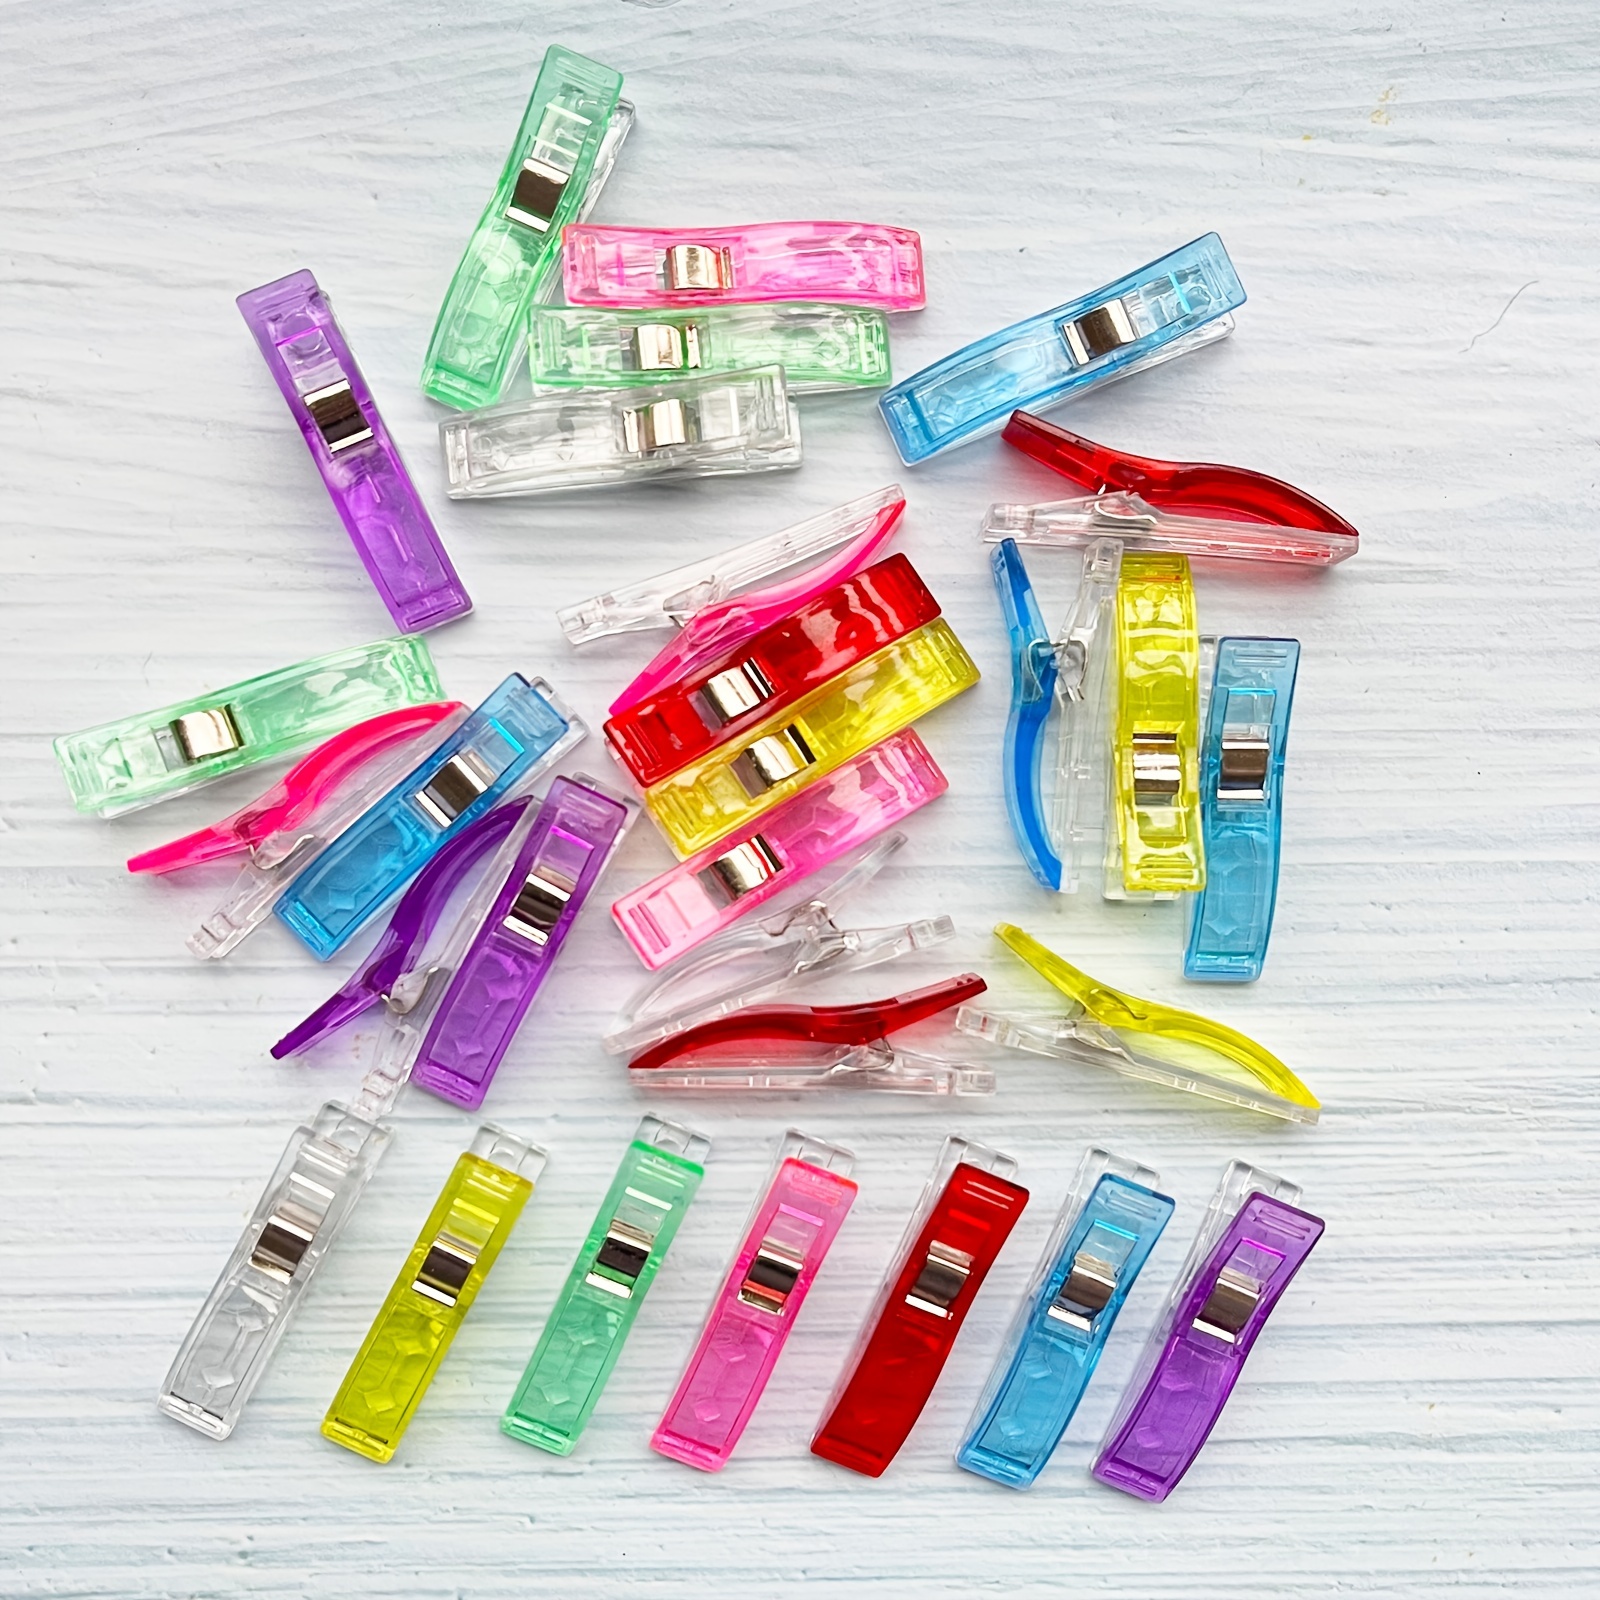 Quilting Clips and Sewing Fabric Clips, Perfect for Sewing  Binding,Crafts,Paper Work and Hanging Little Things - Assorted Colors -  AliExpress